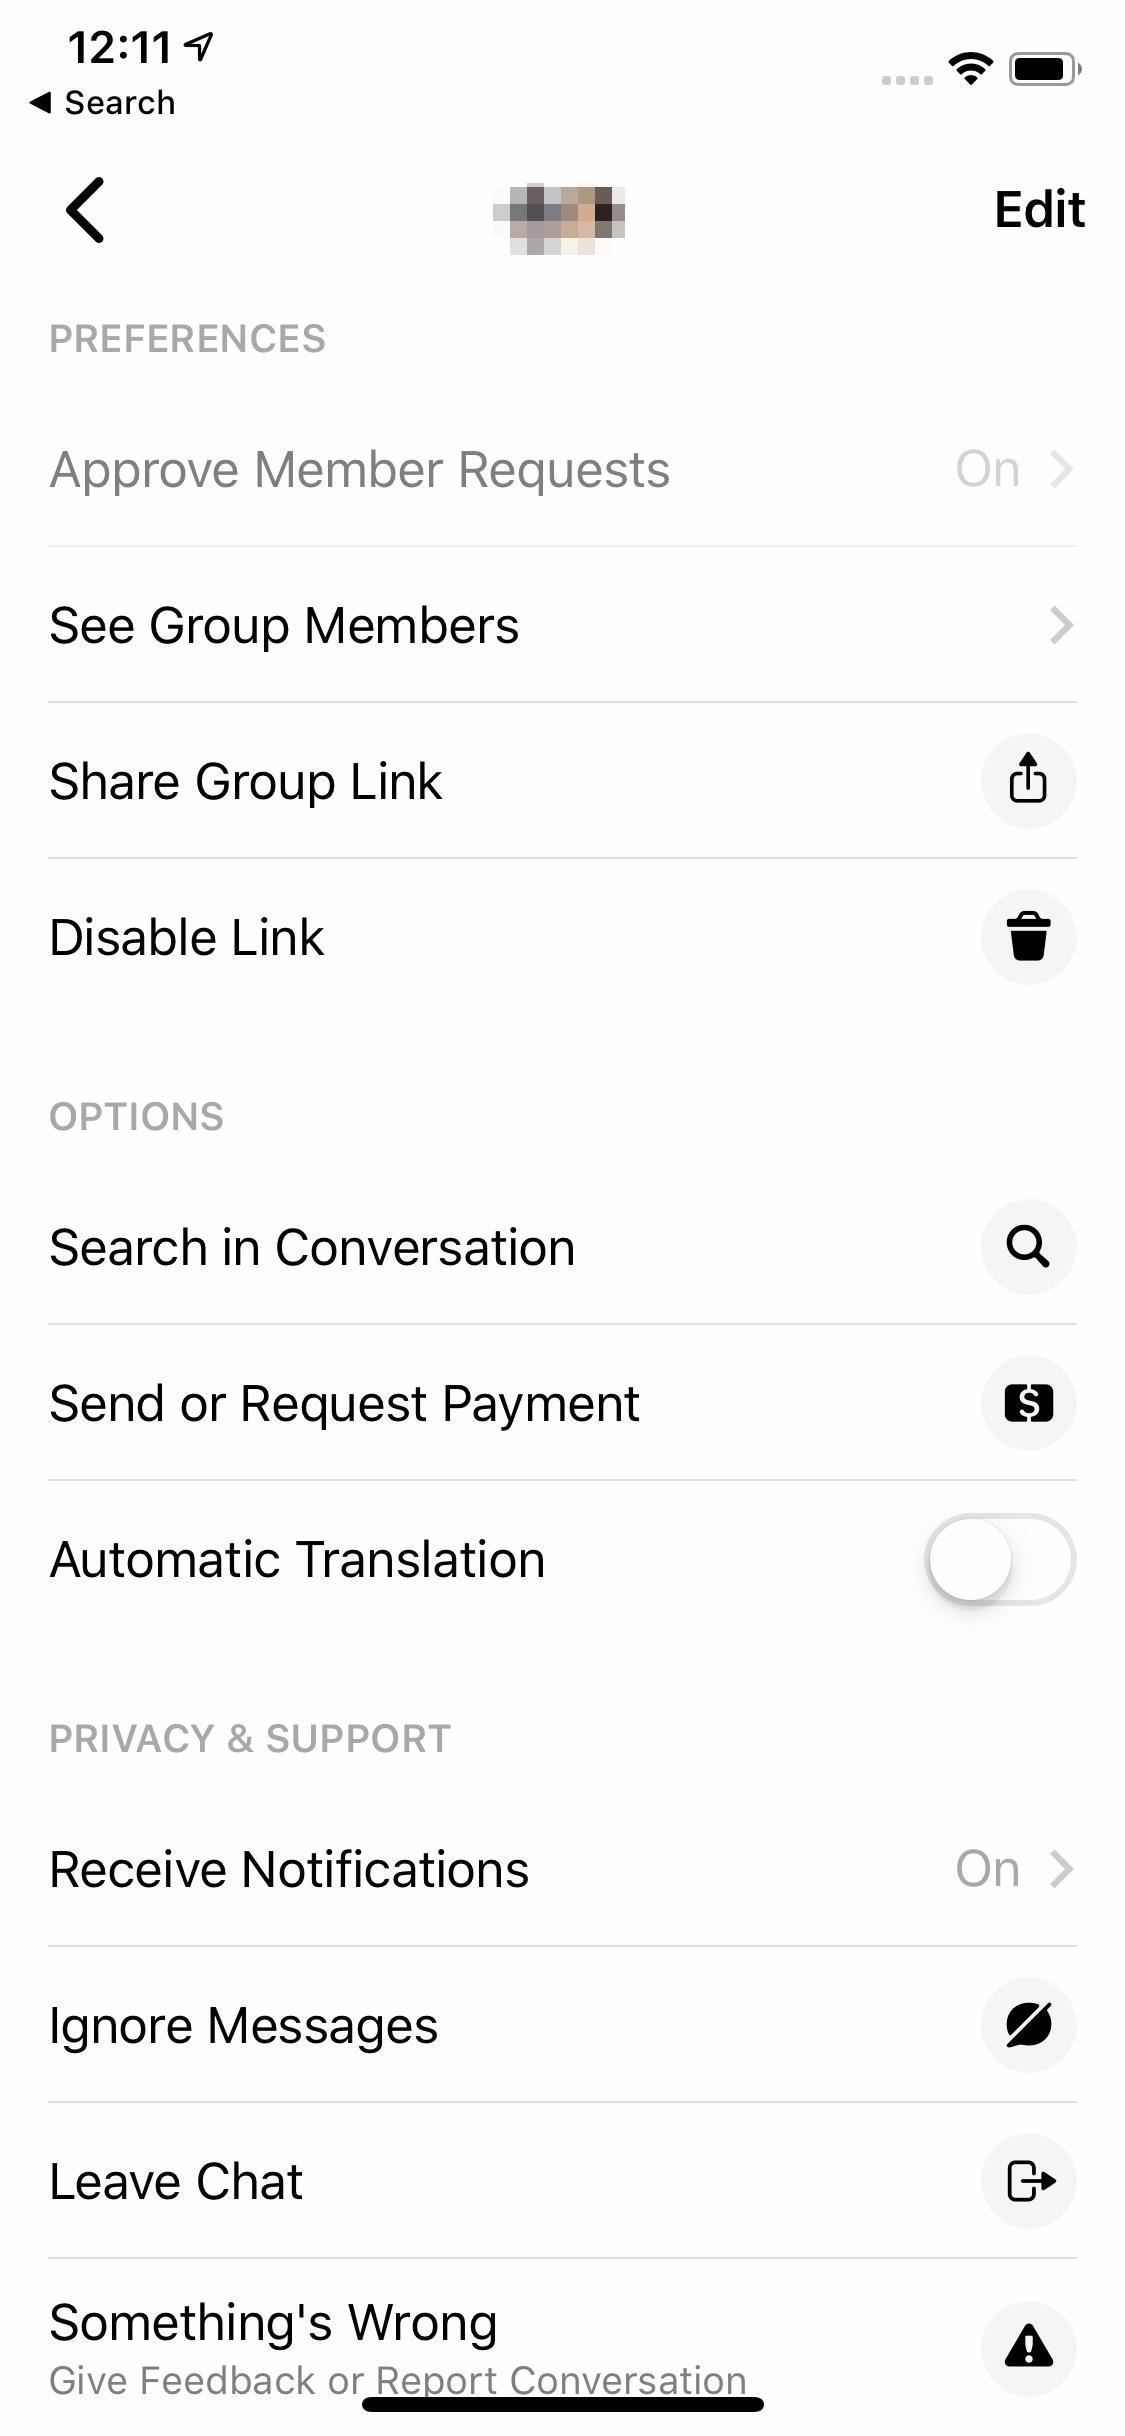 How to Invite People to Messenger Group Chats with a Link So They Can Join Right Away or Wait on Approval